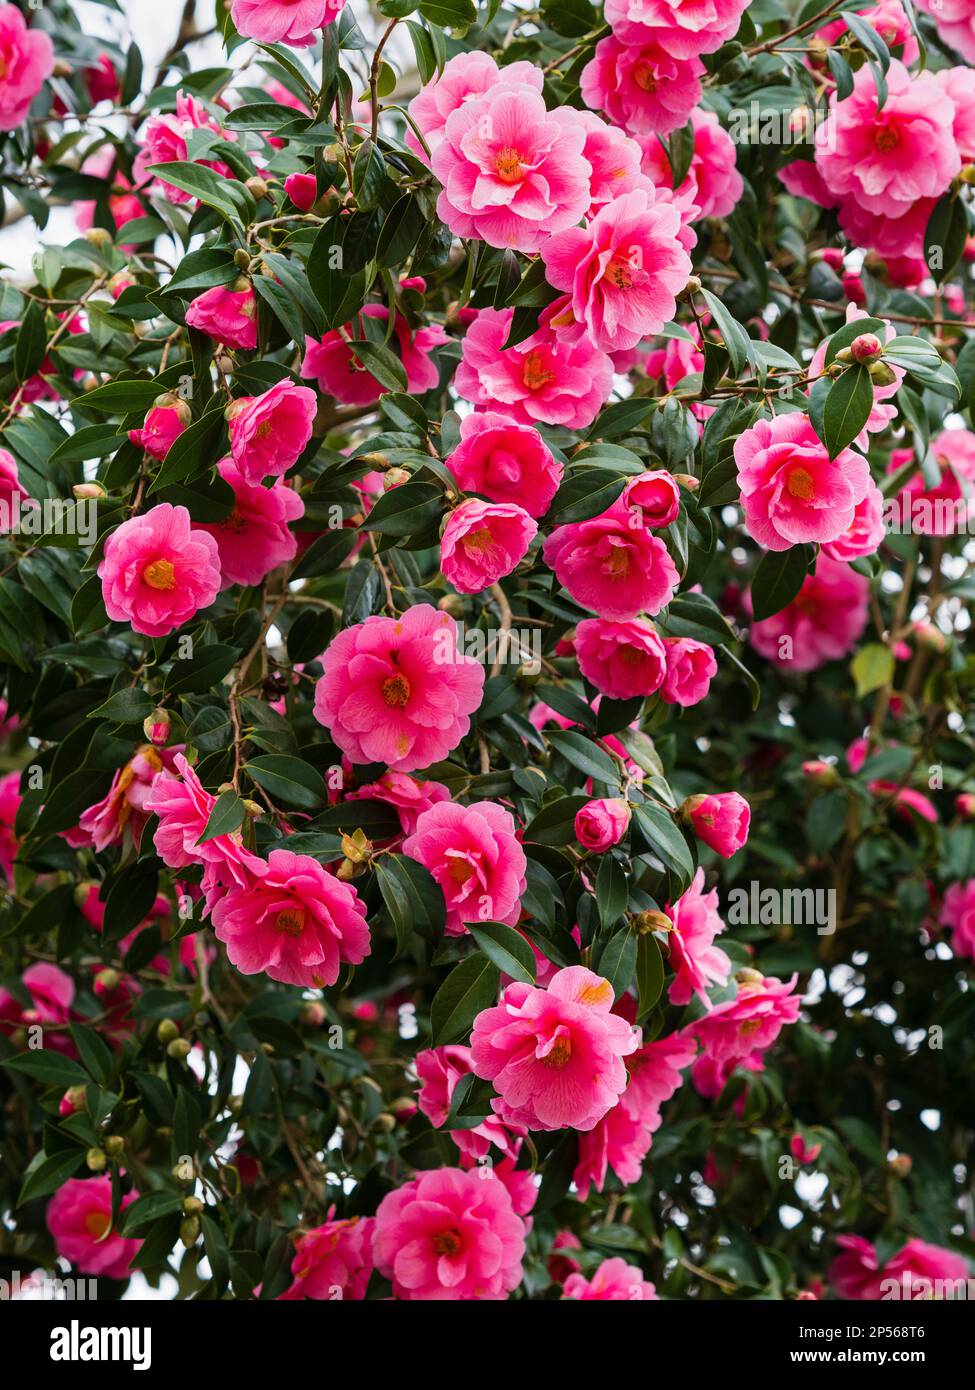 Massed late winter display of the free flowering pink semi double evergreen, Camellia x williamsii 'Donation' Stock Photo